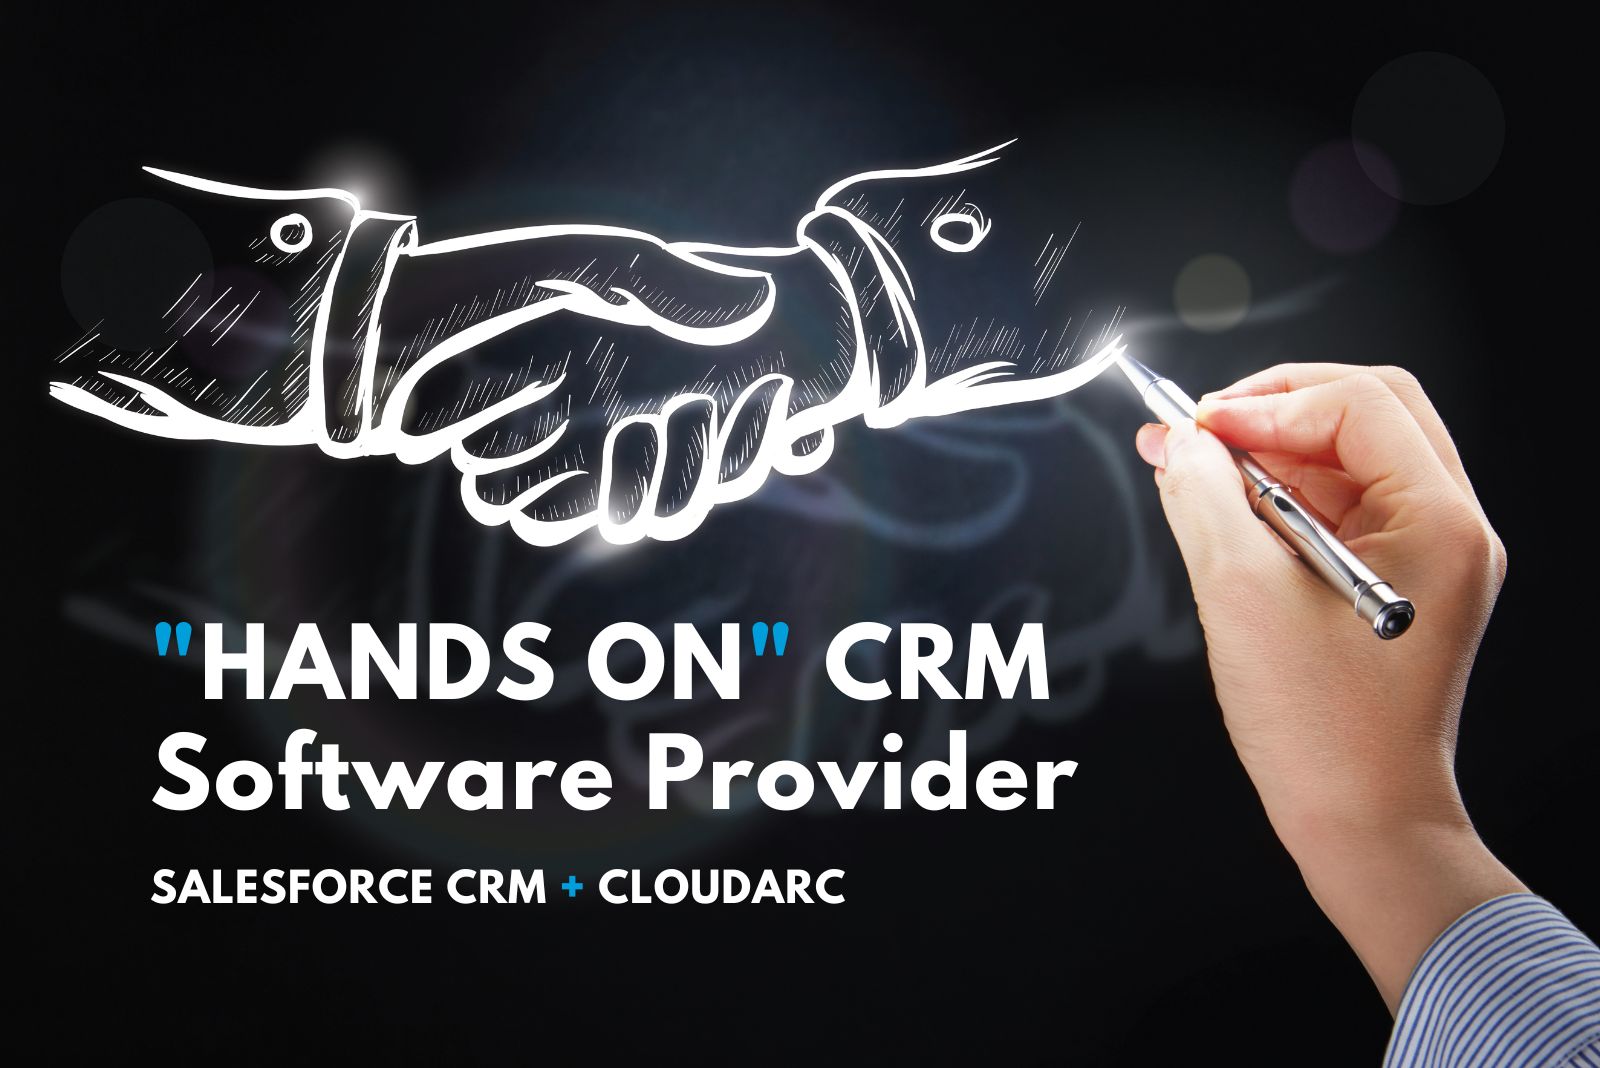 With a Myriad of CRM Tools Available, Why Considering a More "Hands On" CRM Software Provider is Best